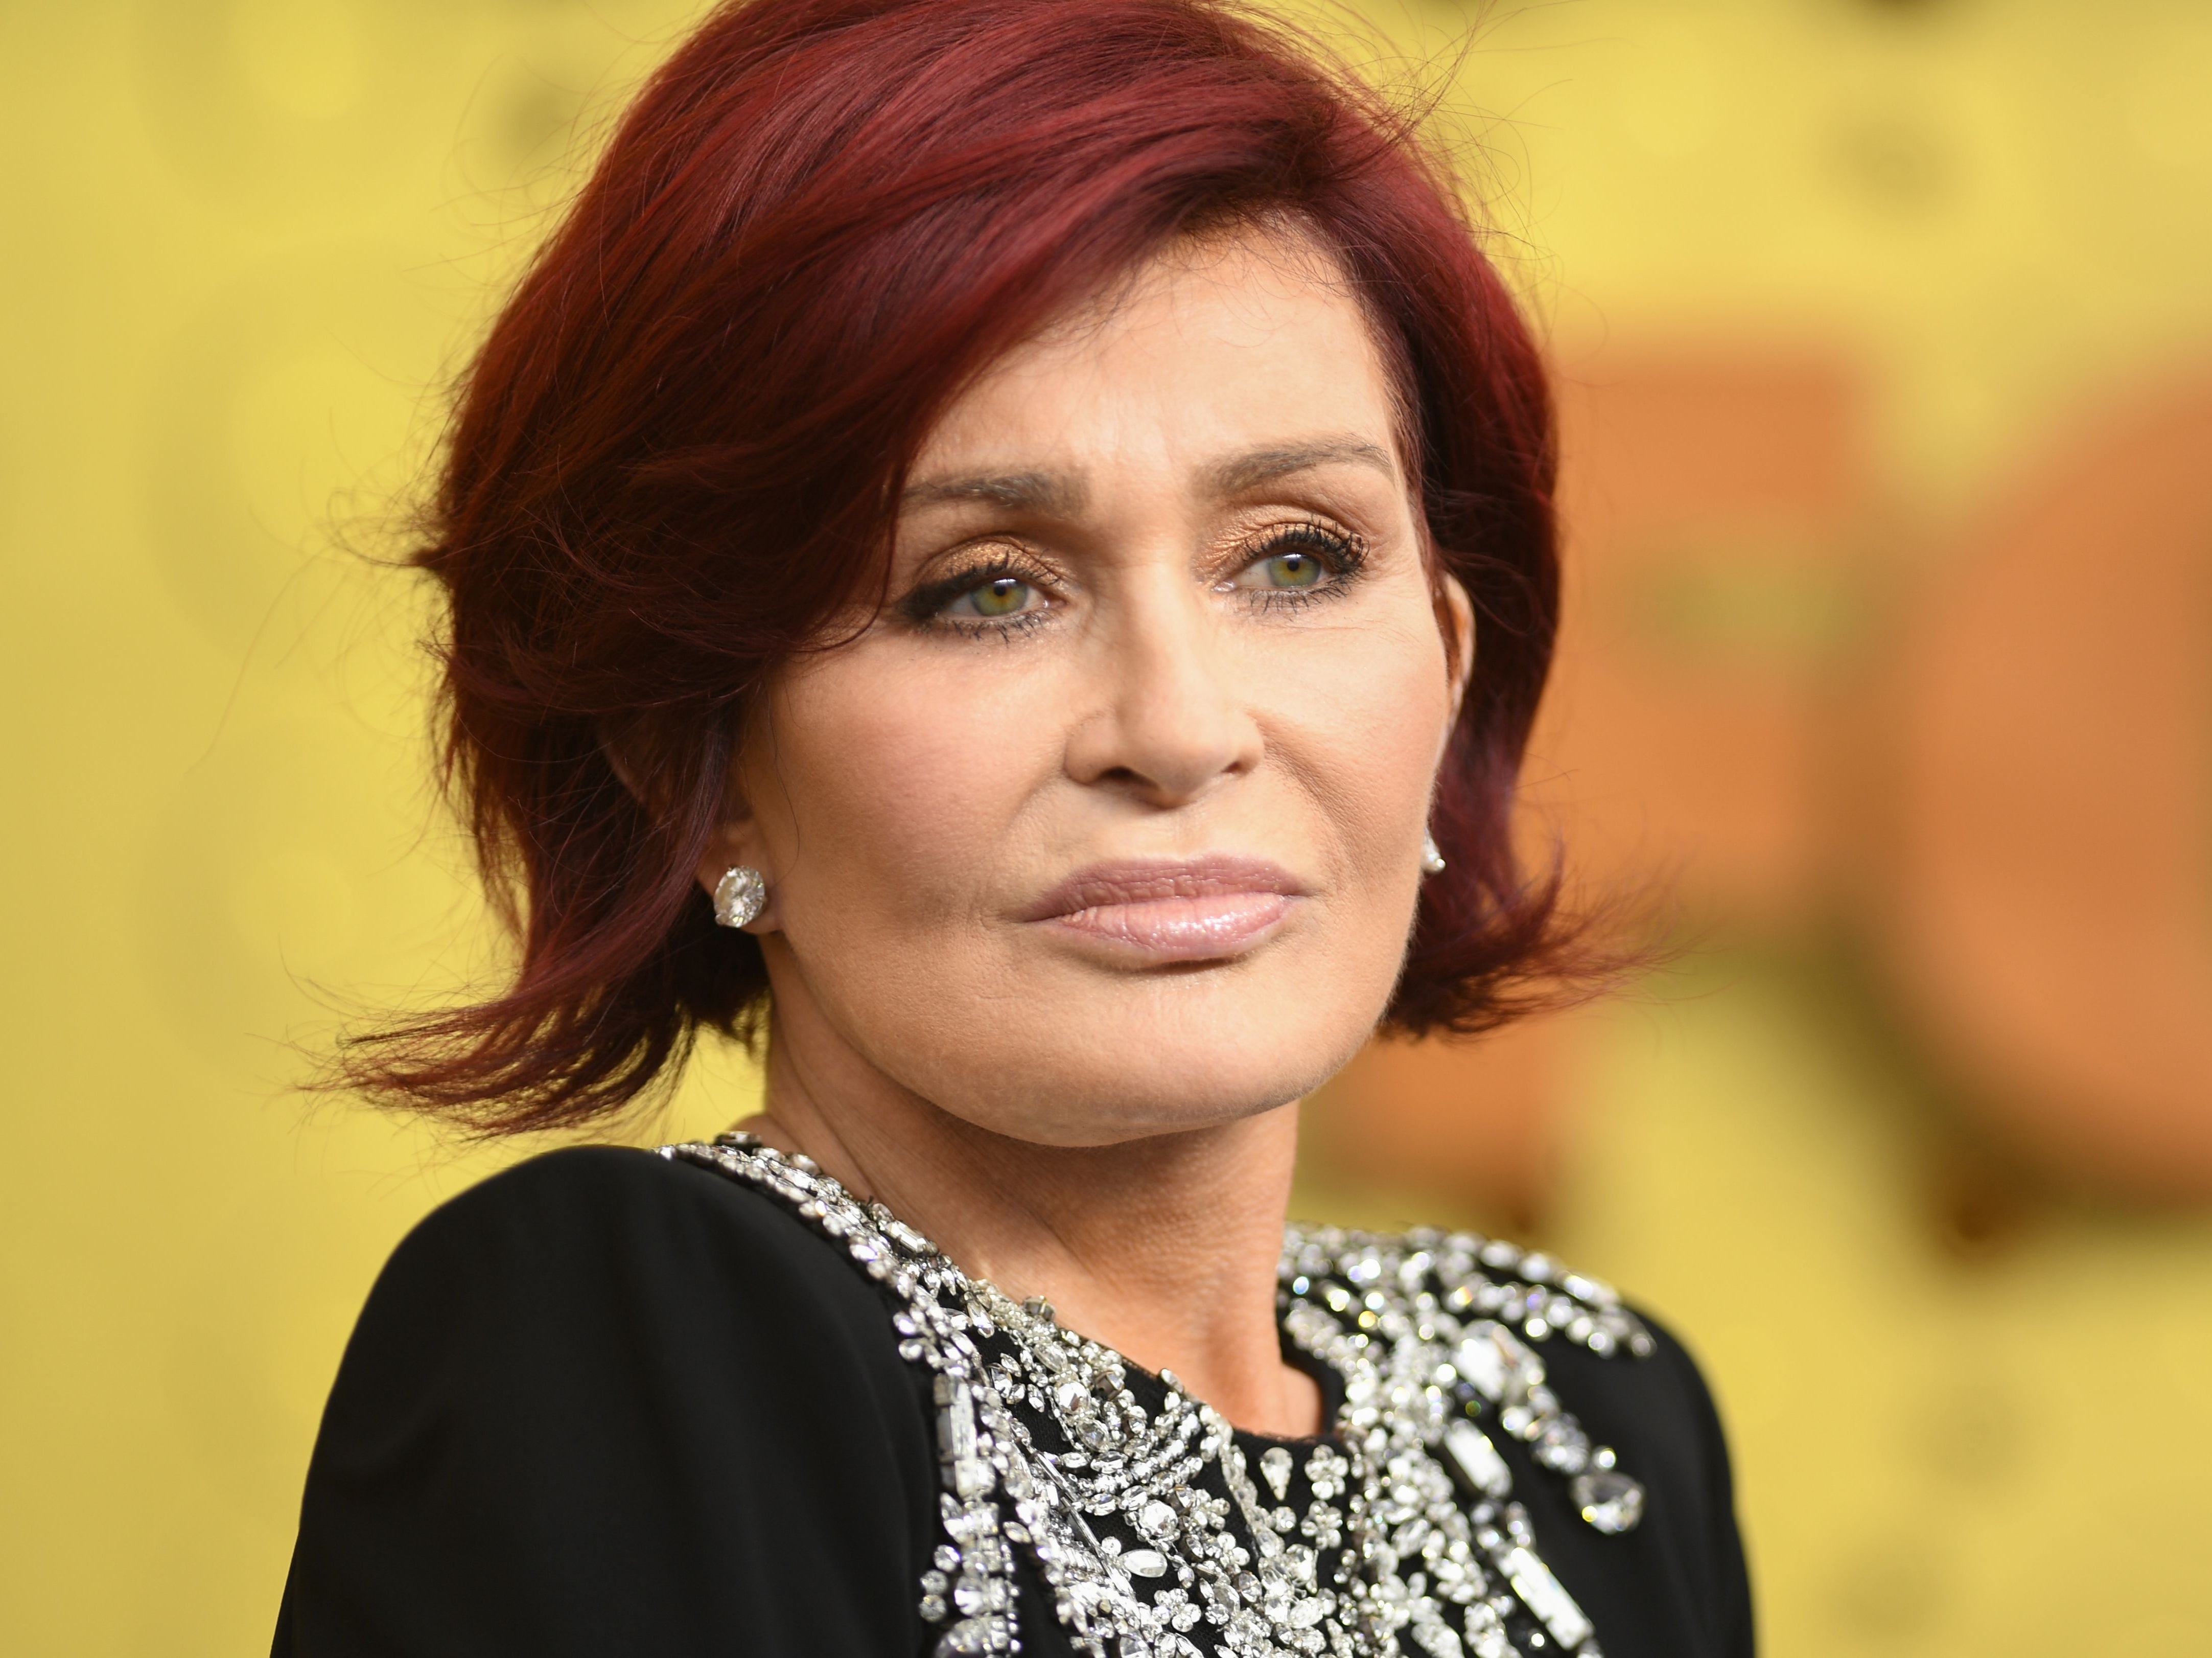 Sharon Osbourne said her family don’t approve of the cosmetic work she has undergone